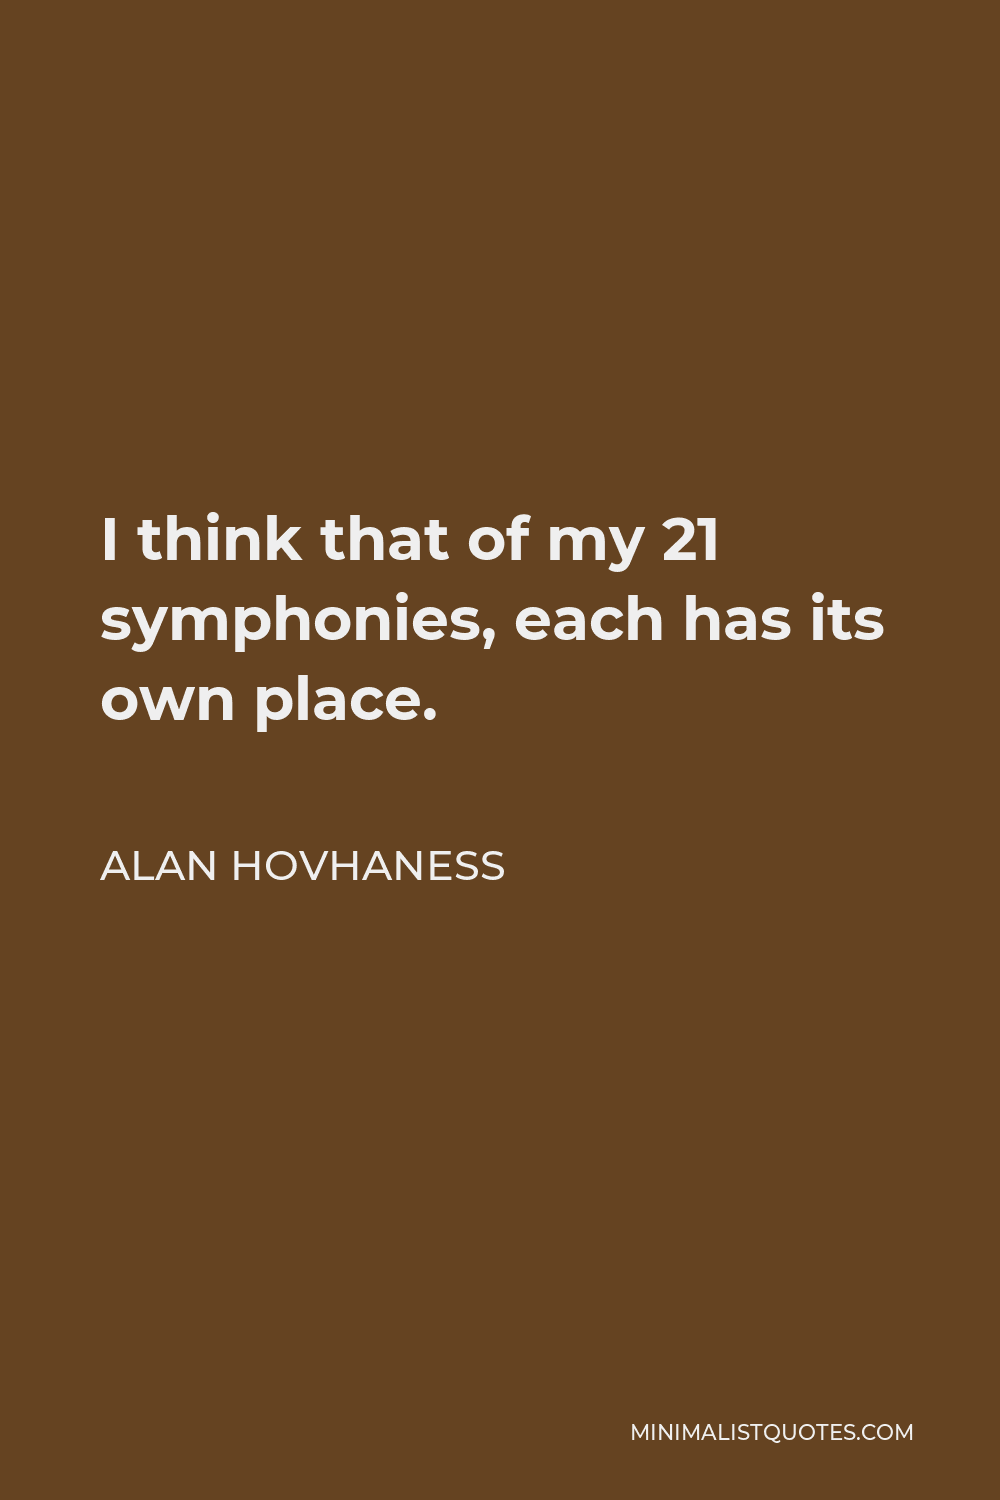 Alan Hovhaness Quote - I think that of my 21 symphonies, each has its own place.